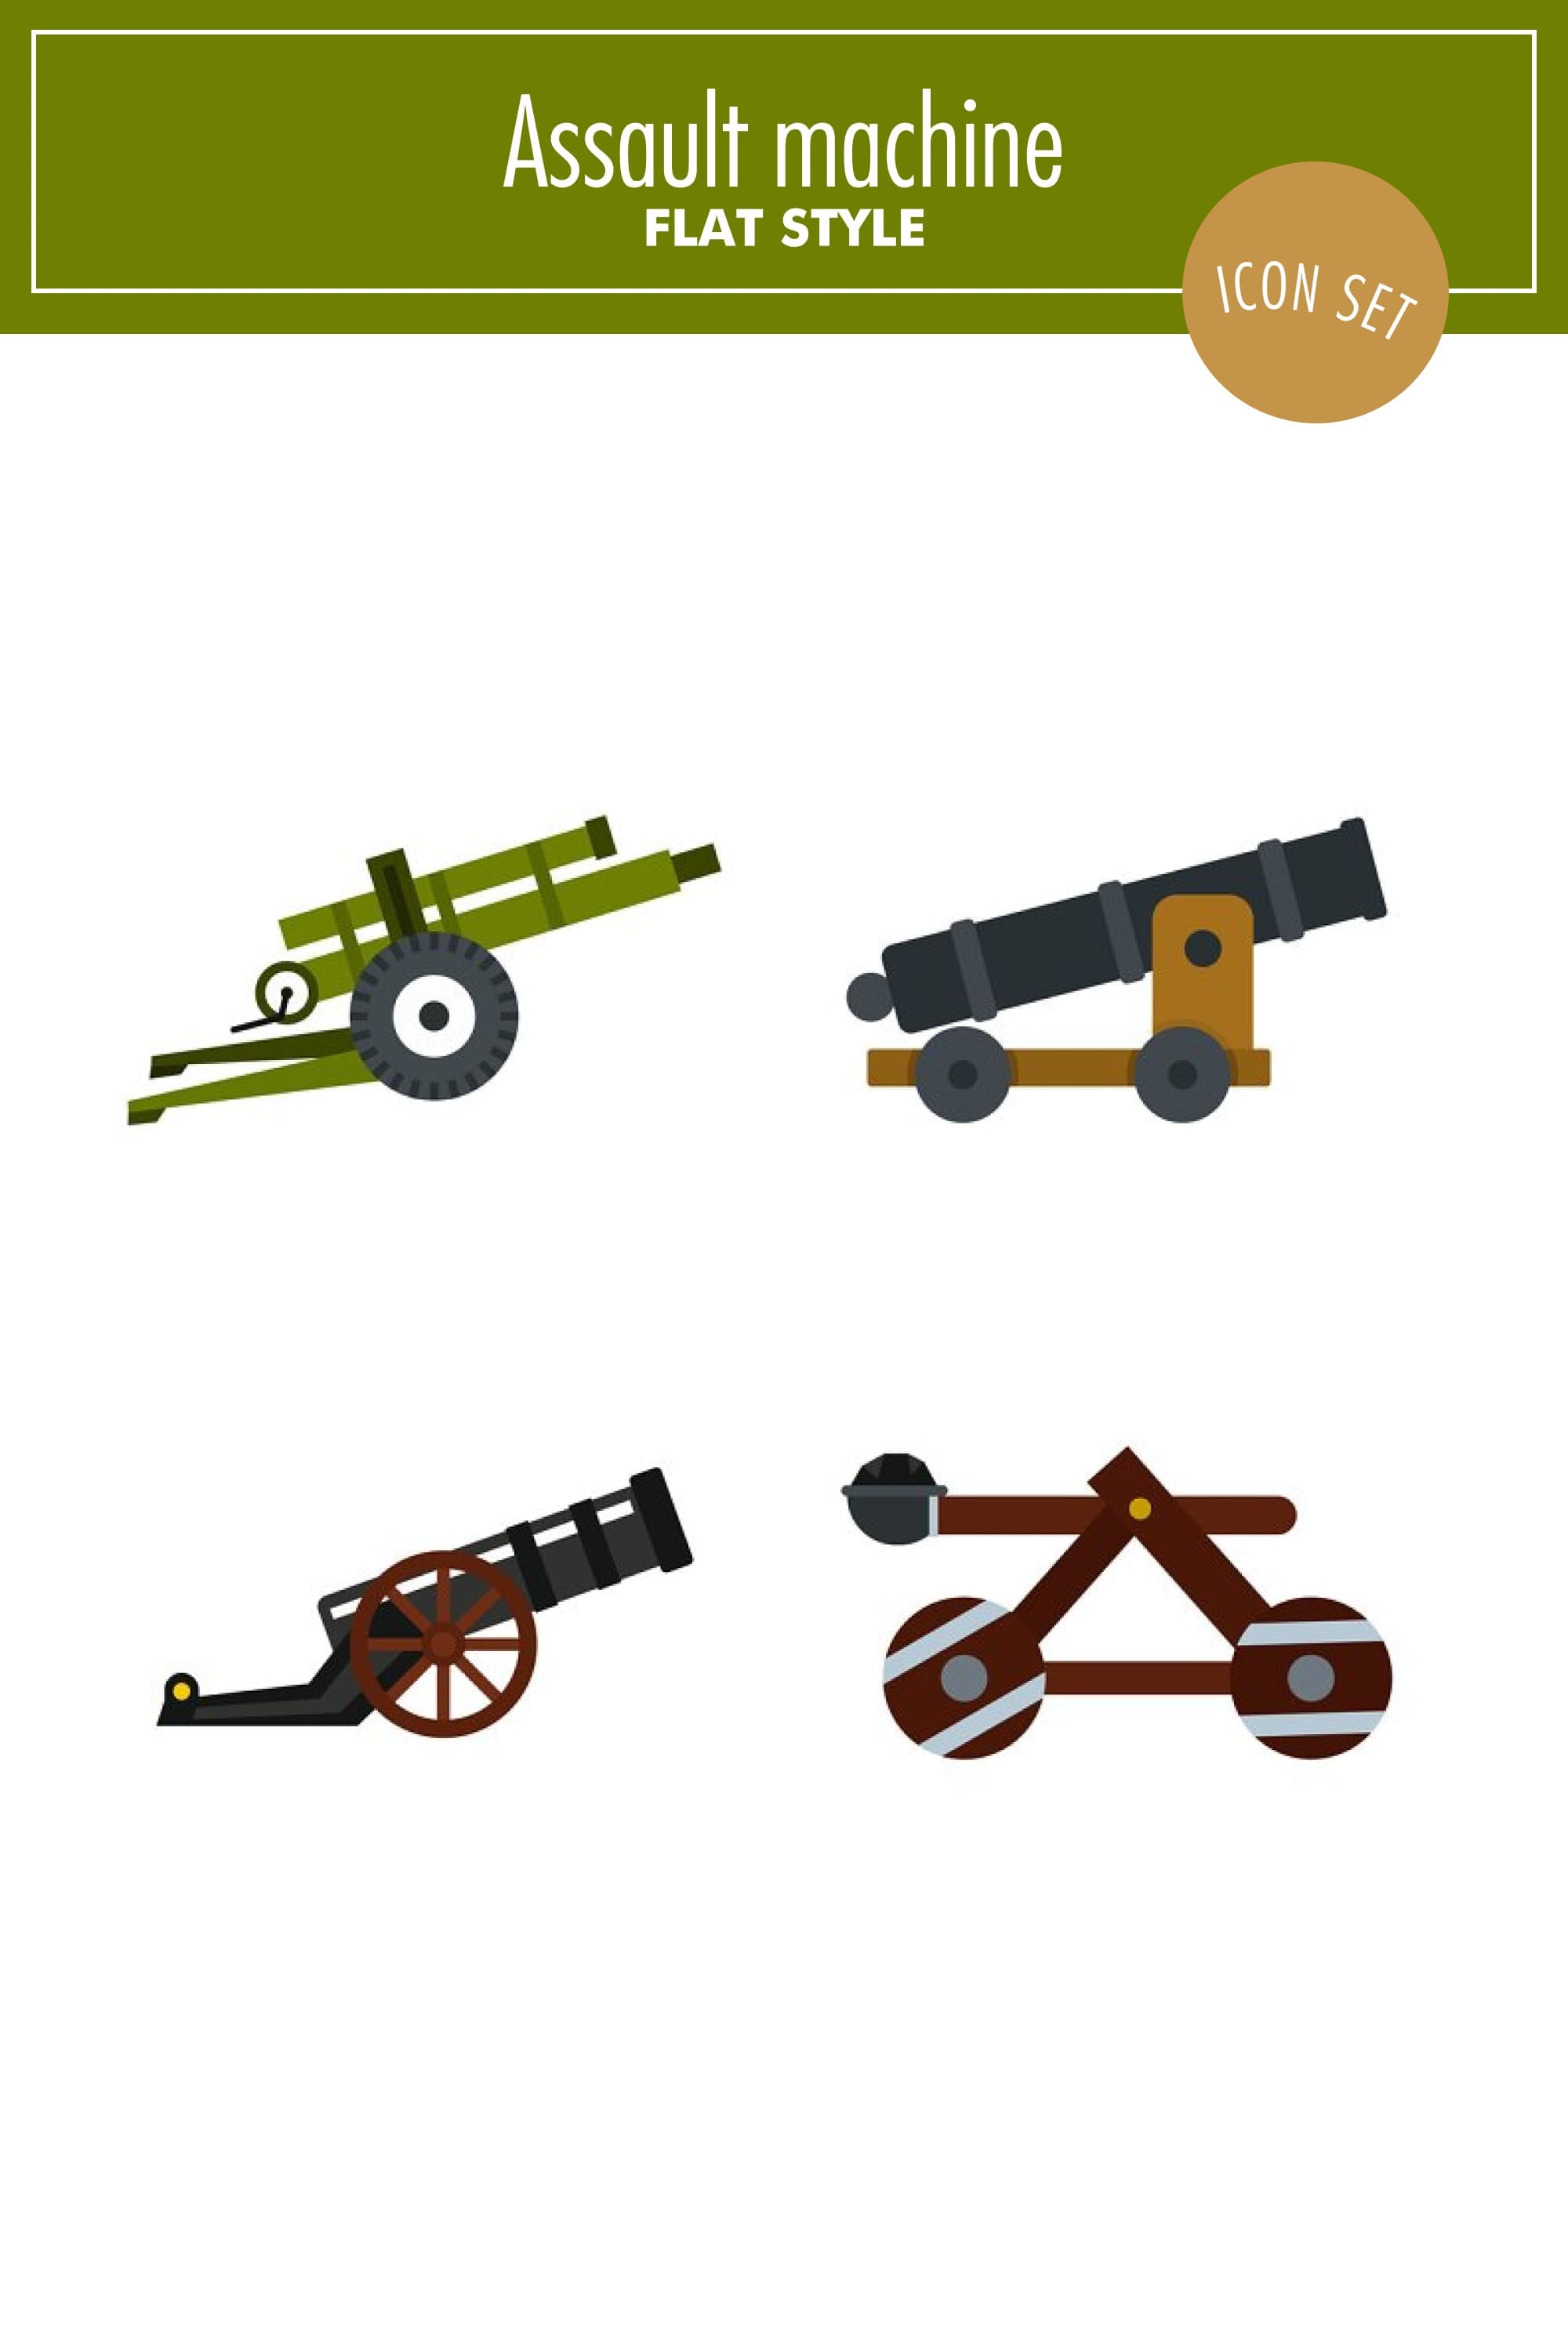 Image of guns with wooden and rubber wheels.